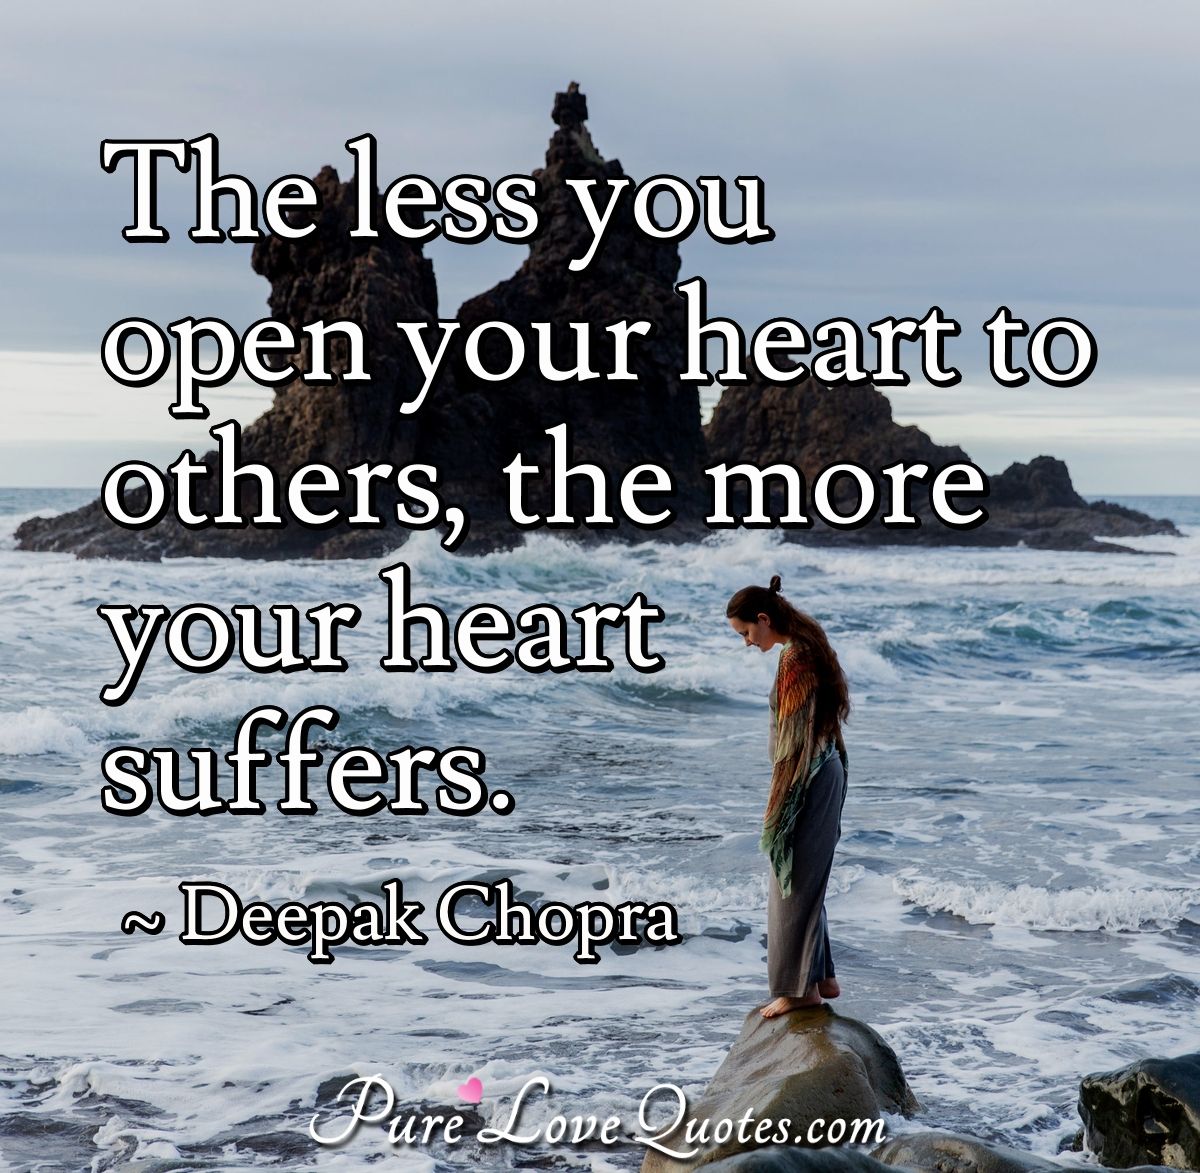 The less you open your heart to others, the more your heart suffers. - Deepak Chopra